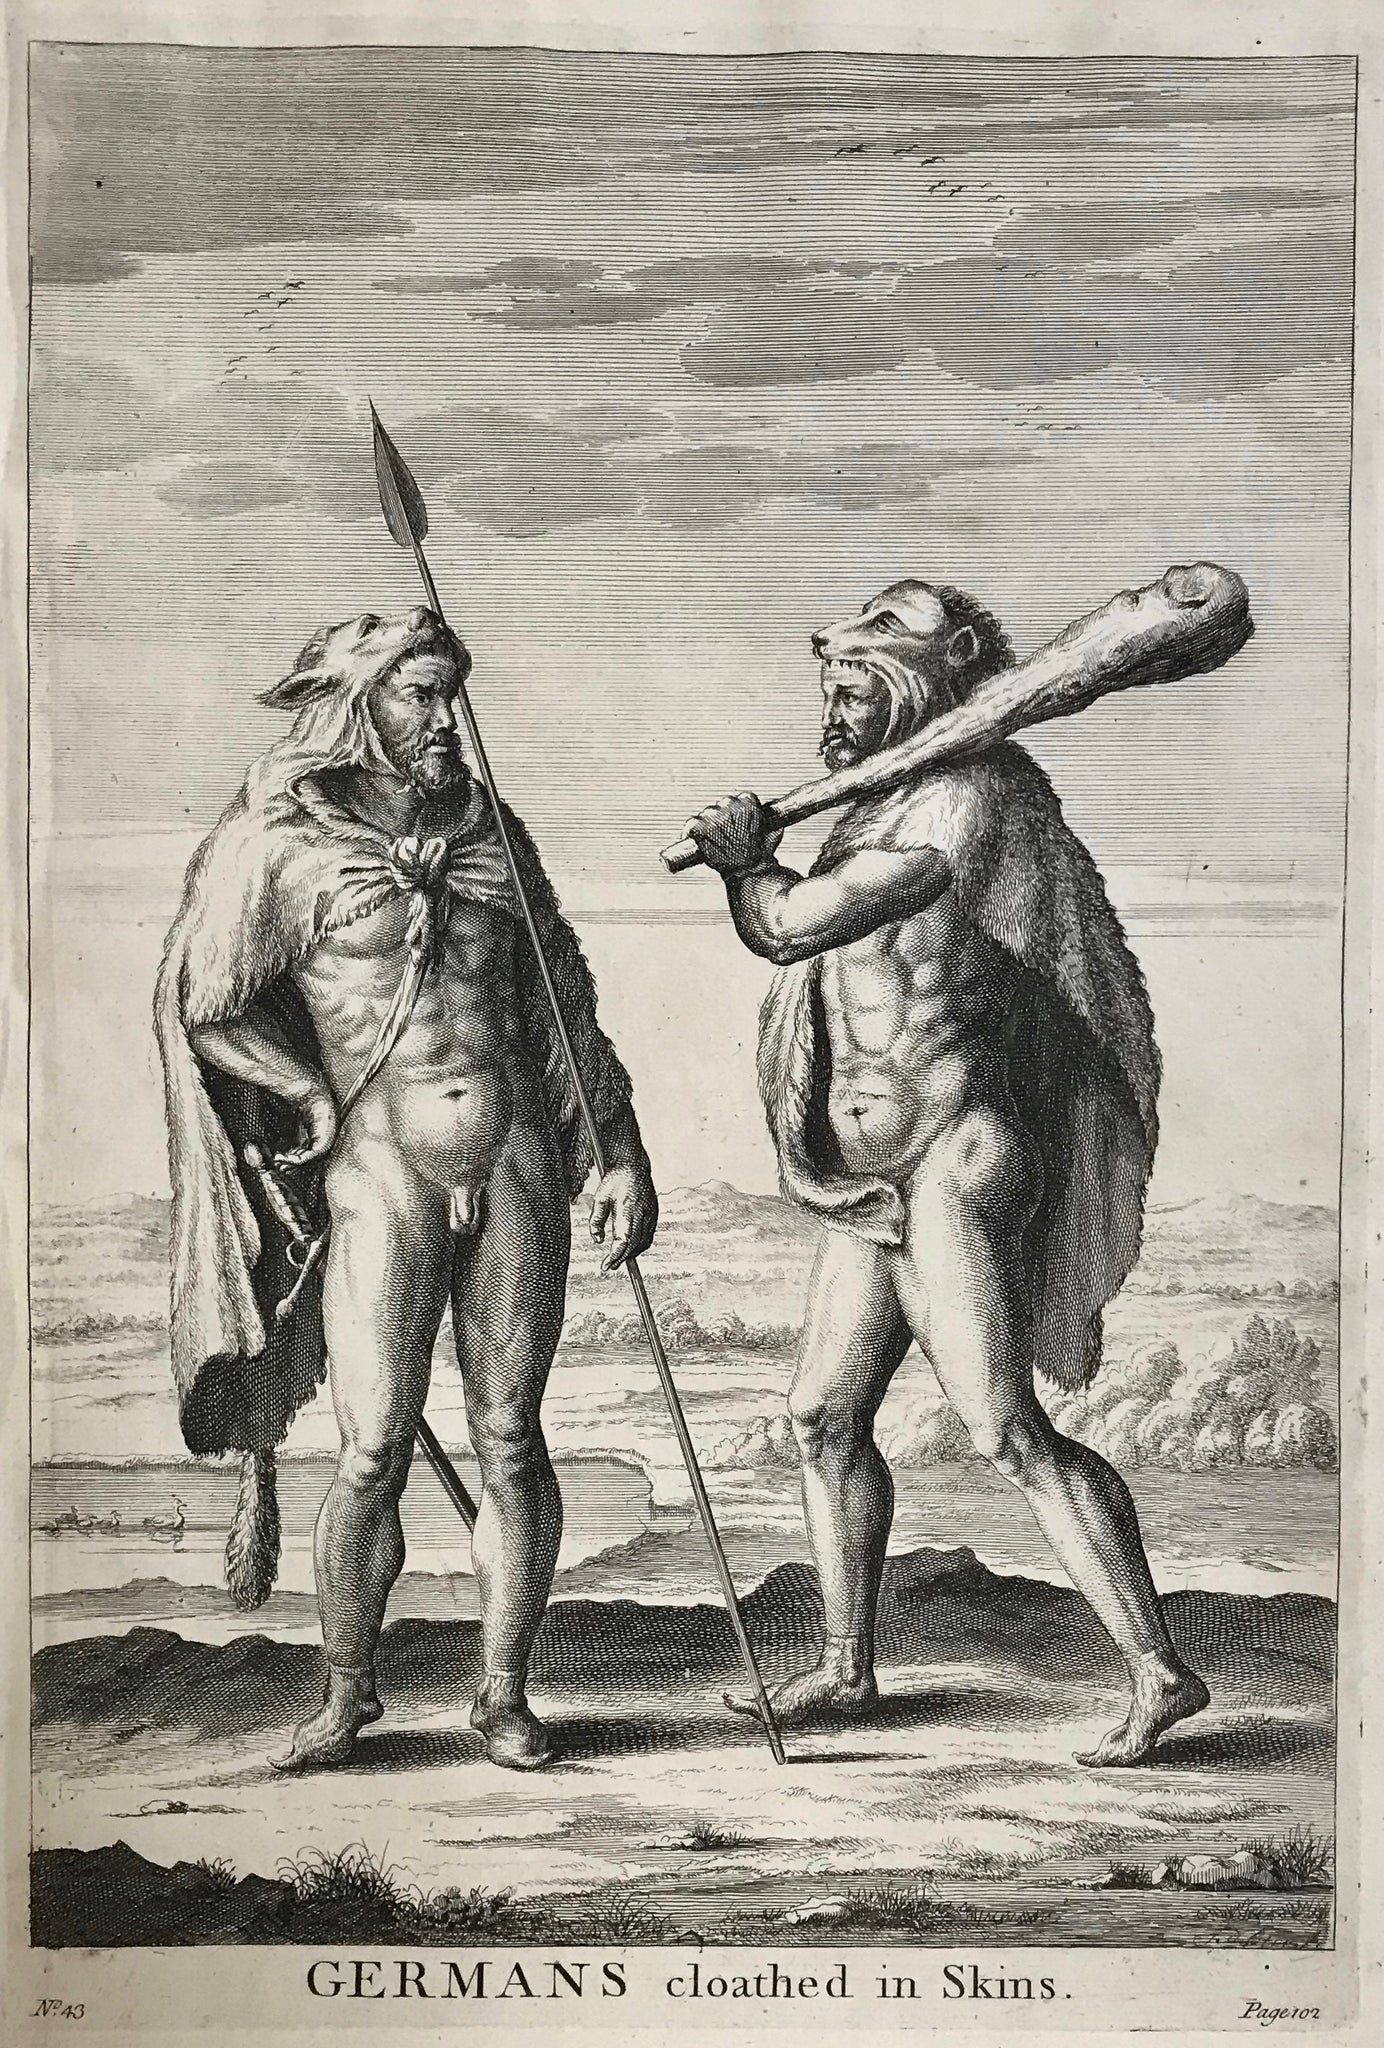    Germans cloathed in Skins entire, with the Horns adapted to their Heads, so as to make themselves terrible.  A few spots in lower margin..  31.7 x 22.5 cm ( 12.4 x 8.8)  Antique Prints of the Celts (Kelten)  From Julius Ceasar's "War Commentaries on the Celts", in which he described the somewhat perplexing encounters with the people north of the Alps. 